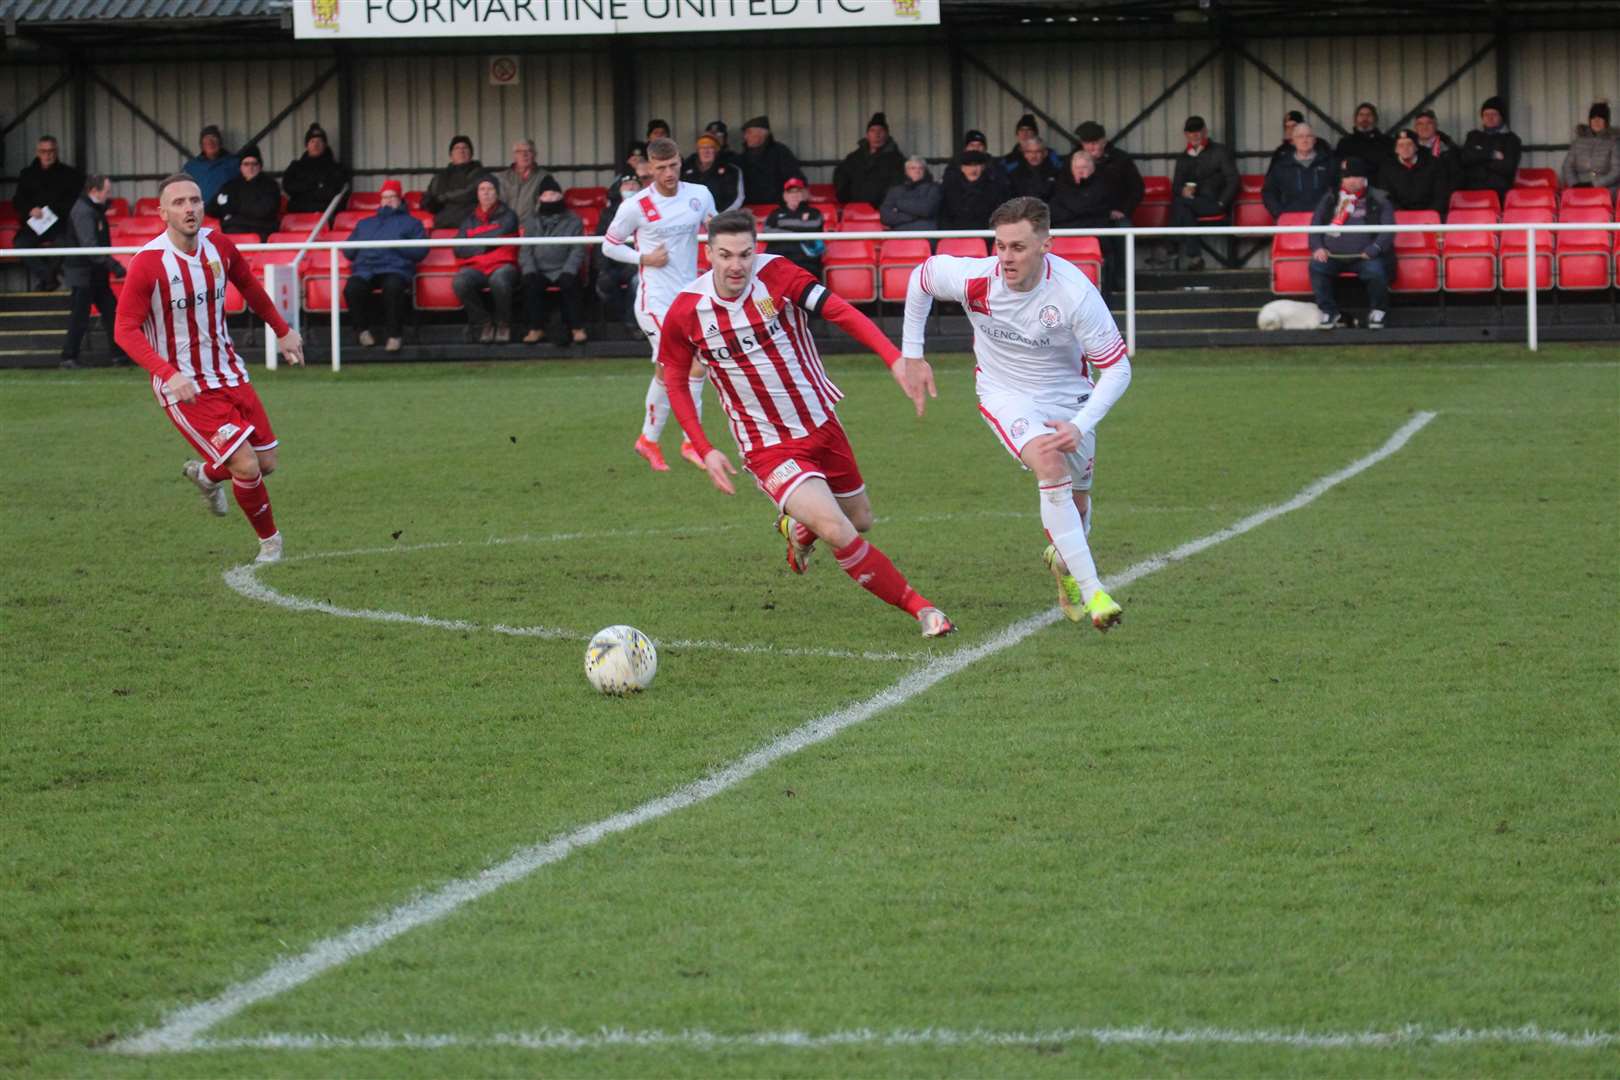 Formartine captain Graeme Rodger scored the winning goal. Picture: Kyle Ritchie